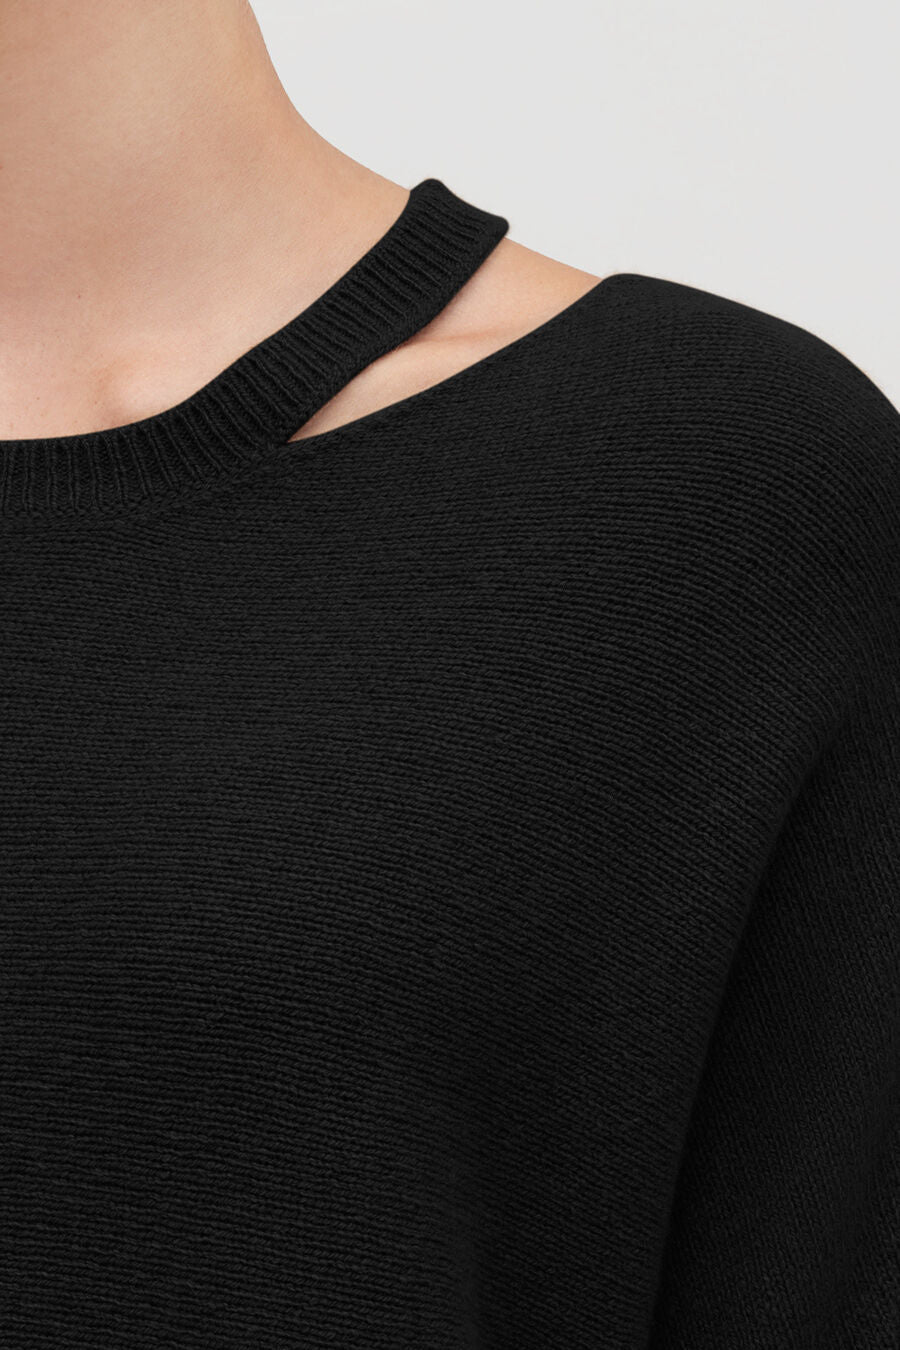 Person in sweater with shoulder cut-out detail.